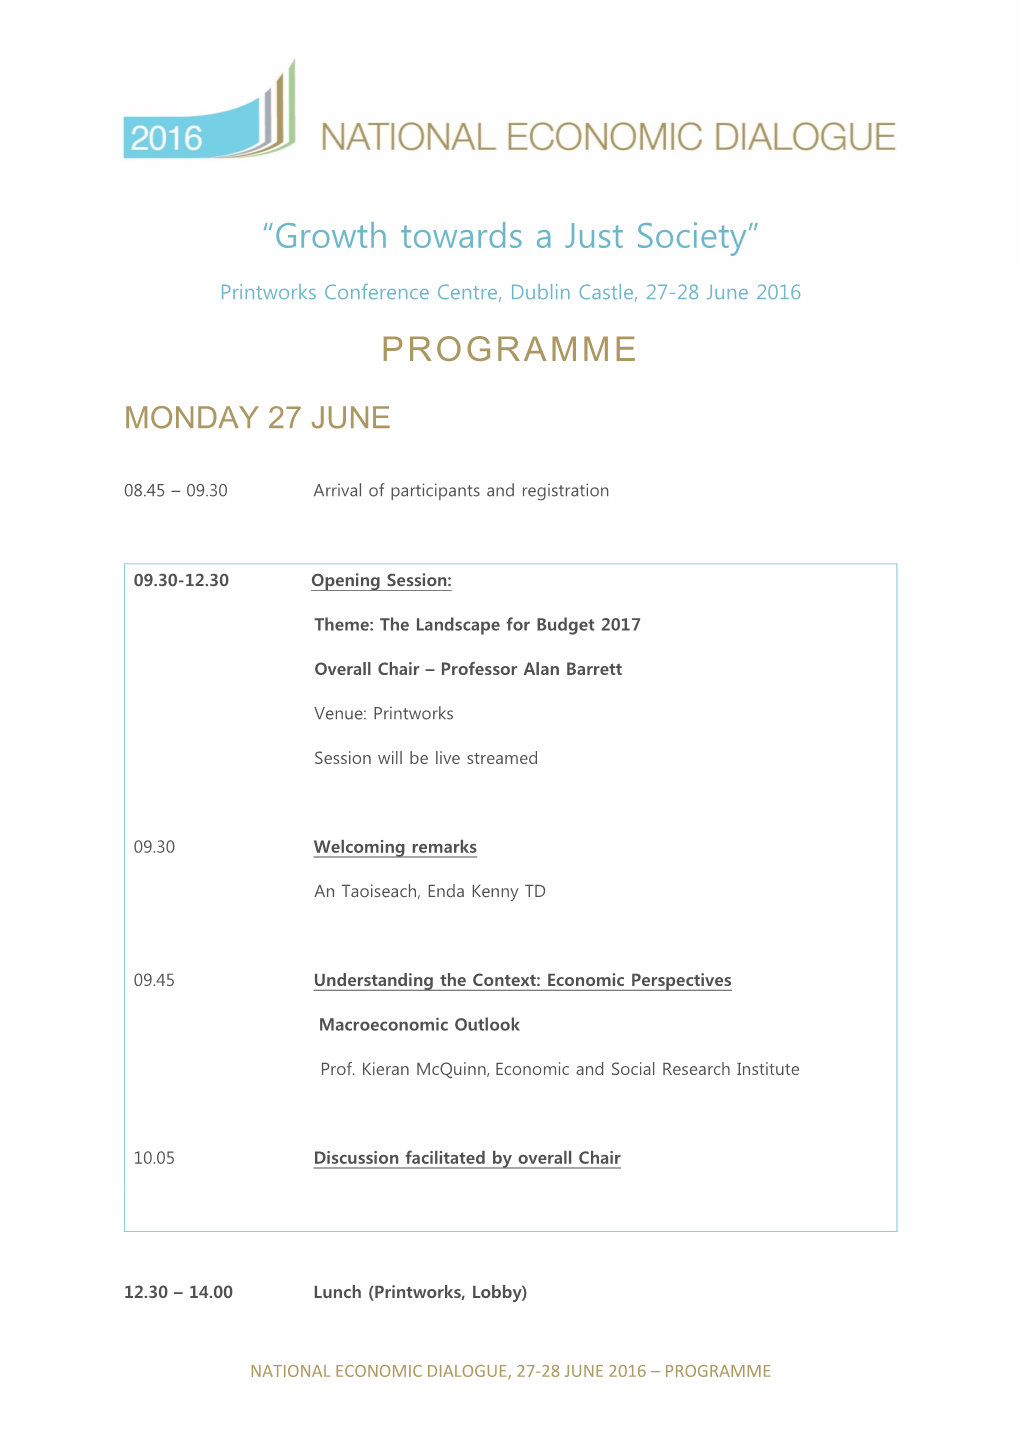 “Growth Towards a Just Society” PROGRAMME